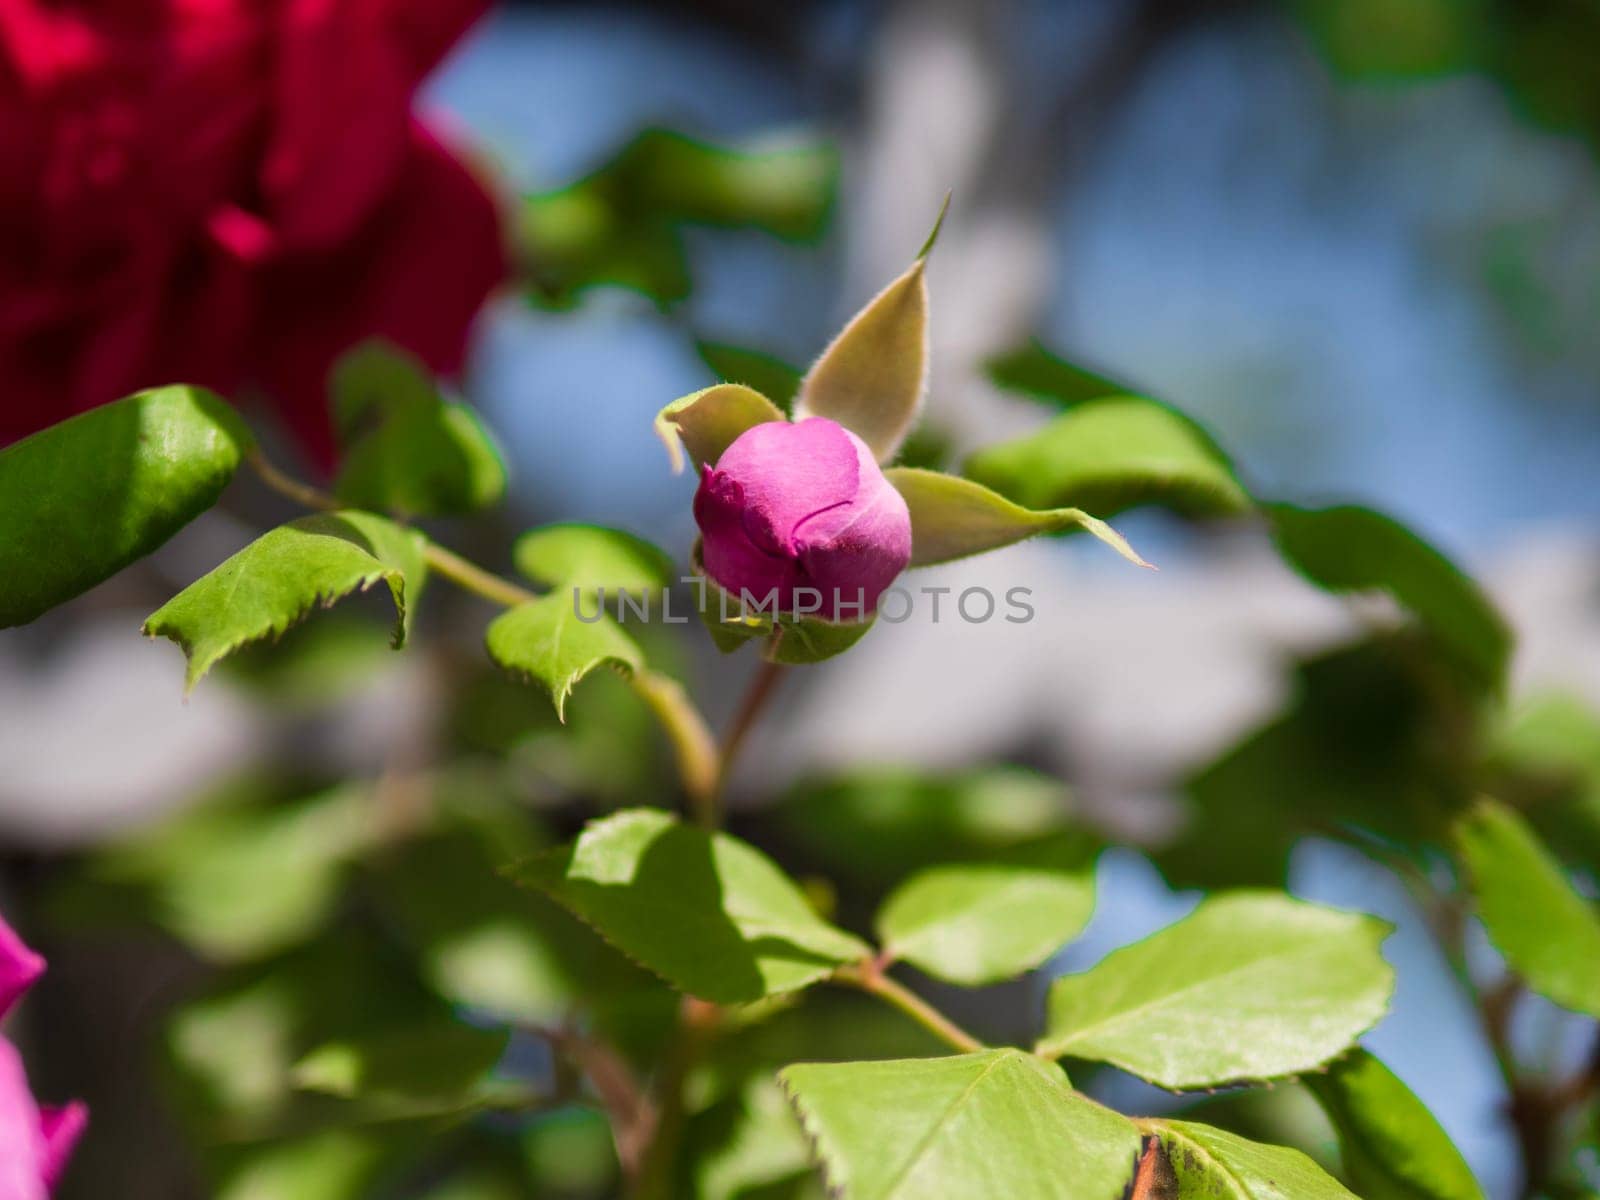 A beautiful red rose bud is blooming on a twig of a hybrid tea rose plant,